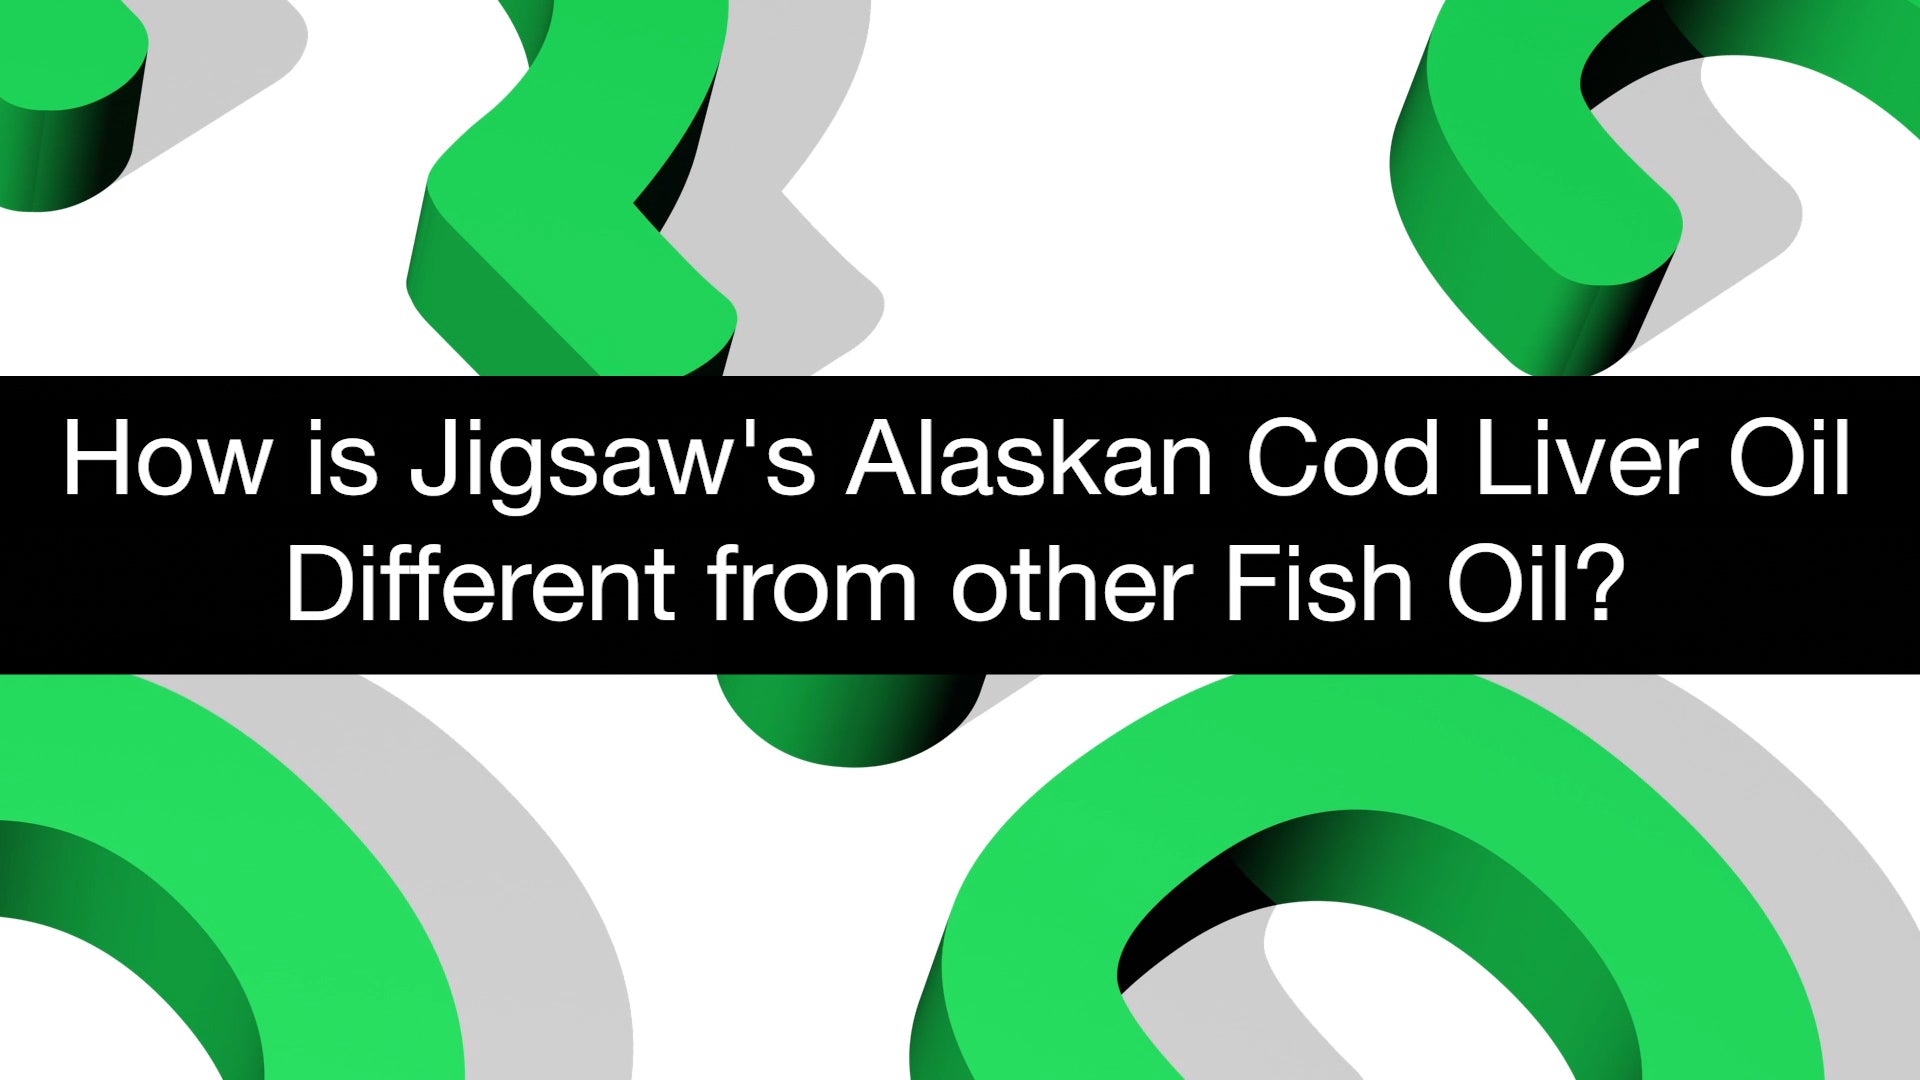 How is Jigsaw's Alaskan Cod Liver Oil different from other Fish Oil?